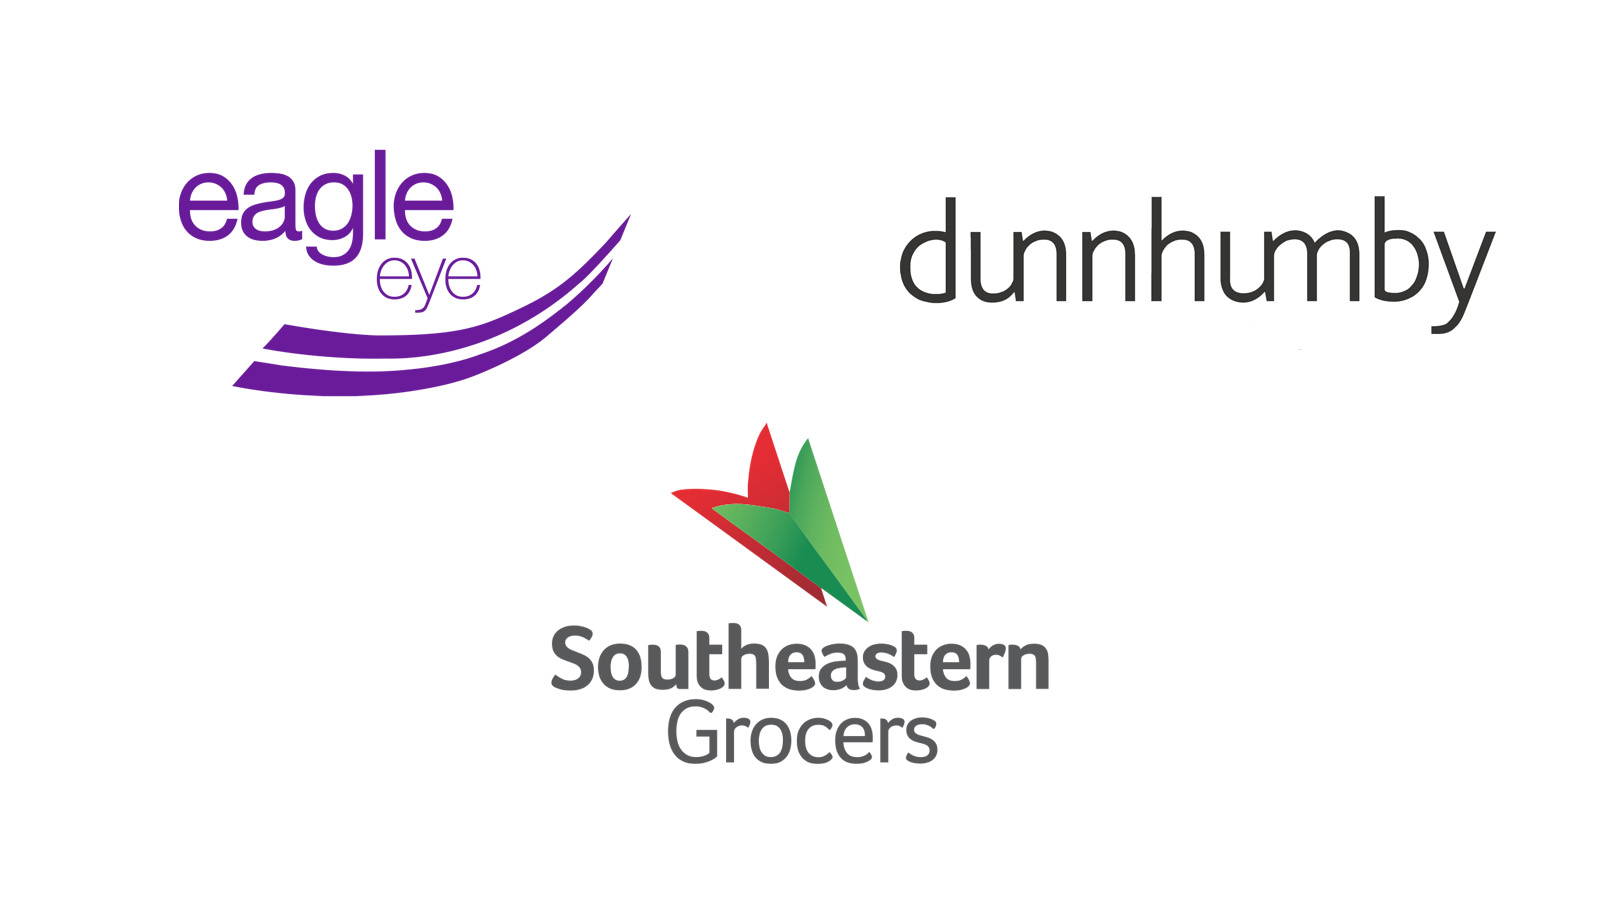 Eagle Eye, dunnhumby, and Southeastern Grocers